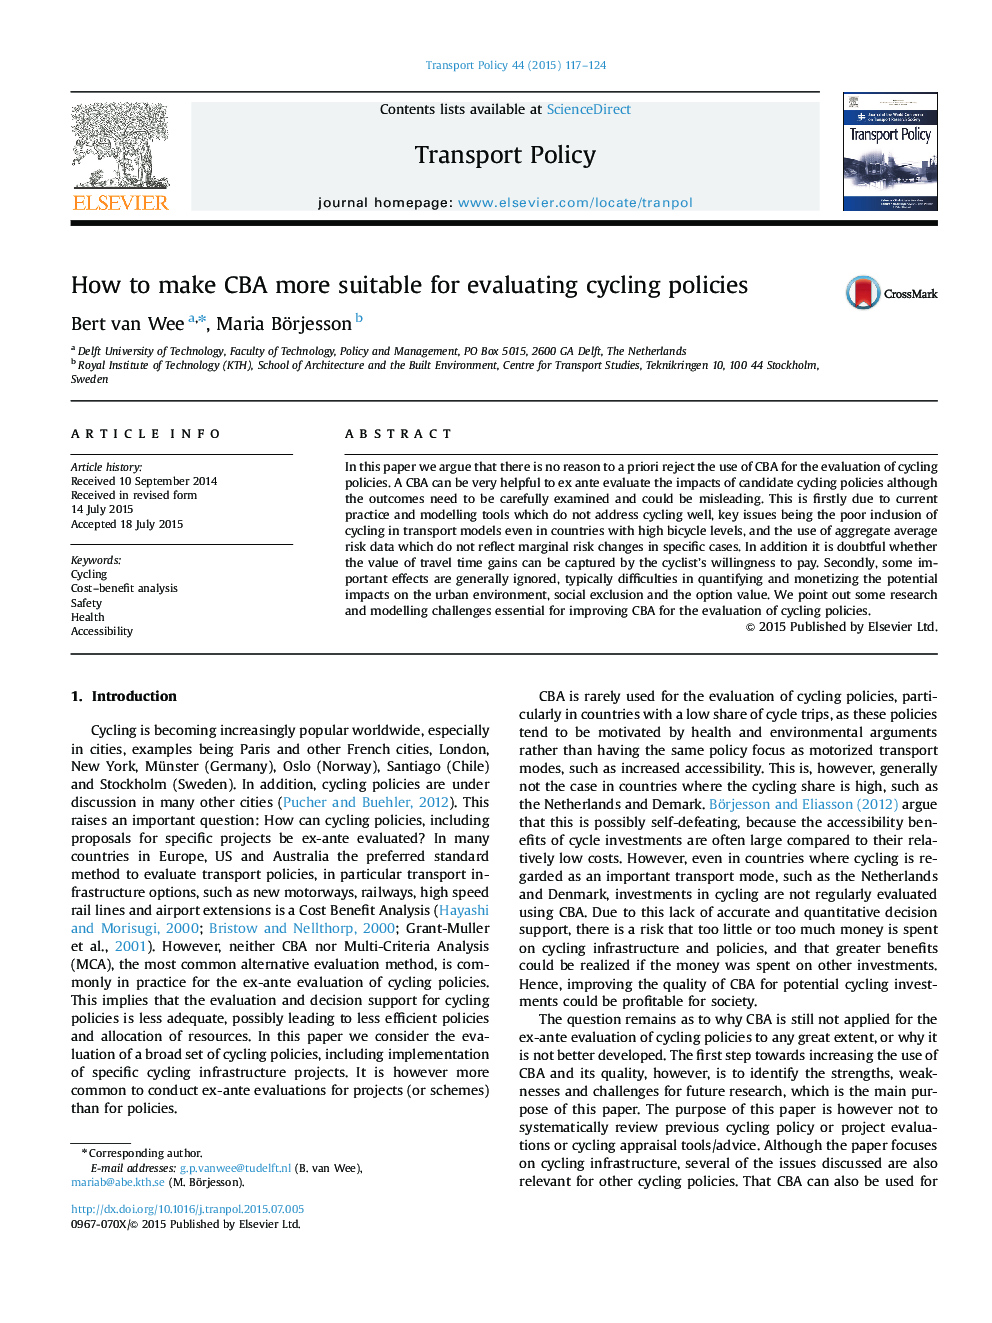 How to make CBA more suitable for evaluating cycling policies